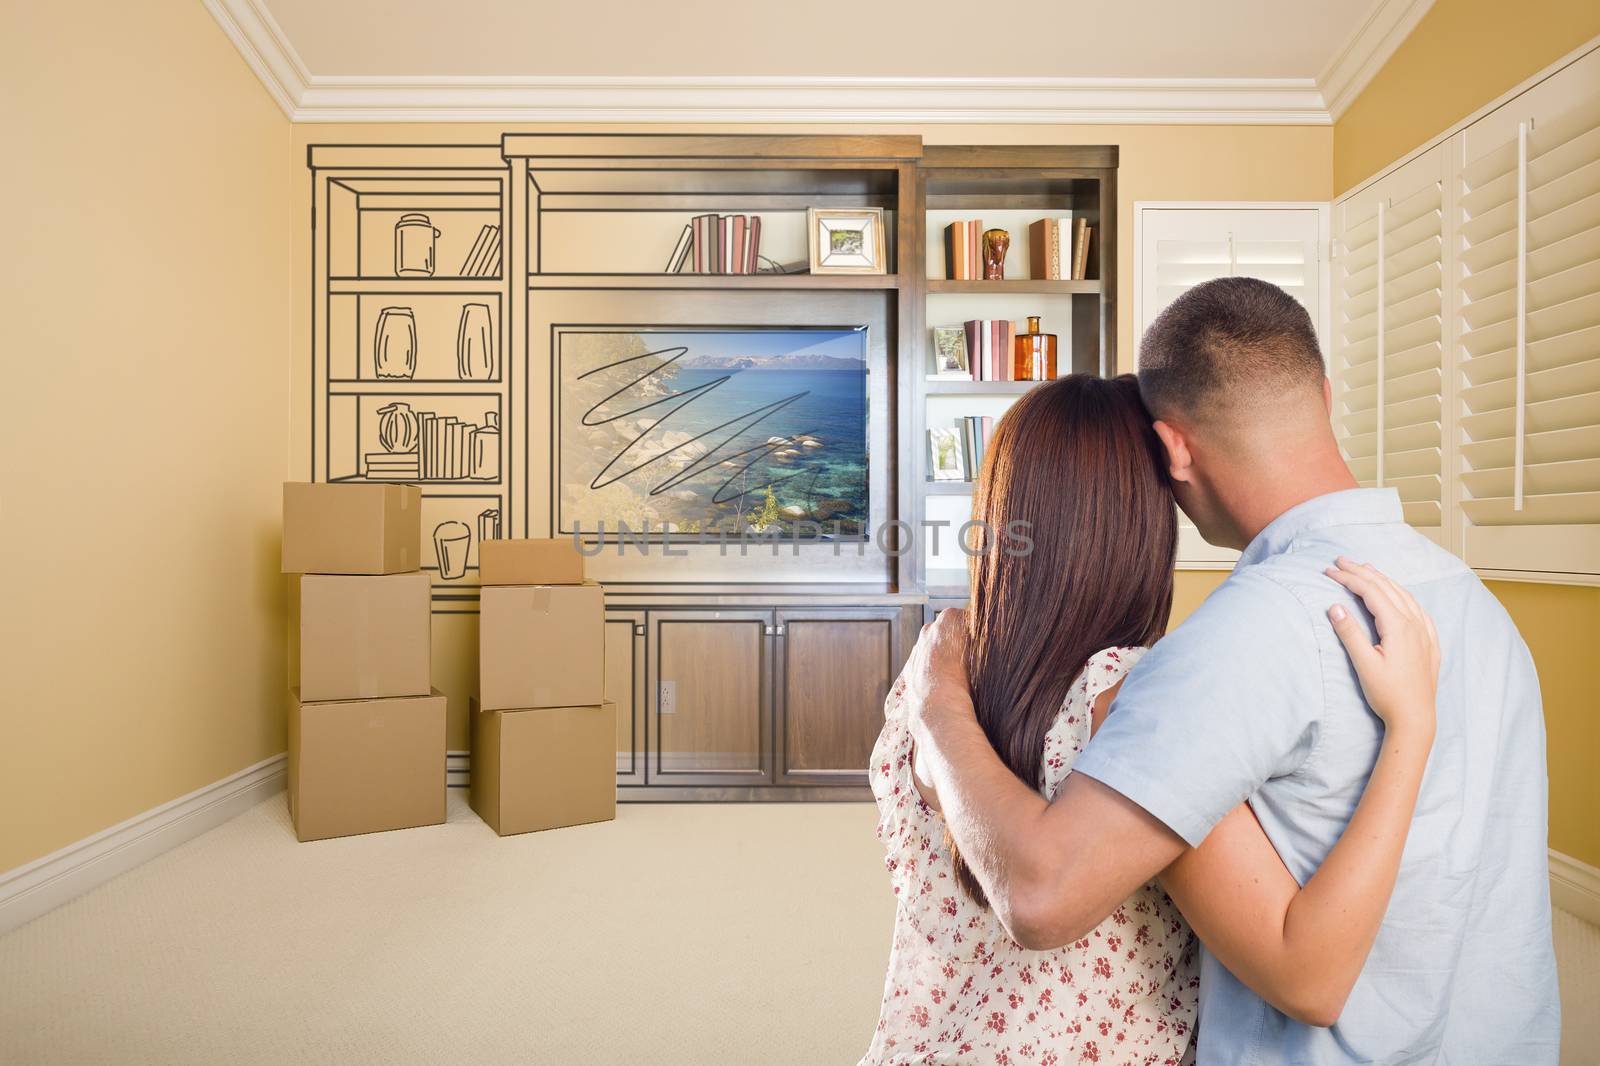 Young Couple Looking At Drawing of Entertainment Unit In Room by Feverpitched